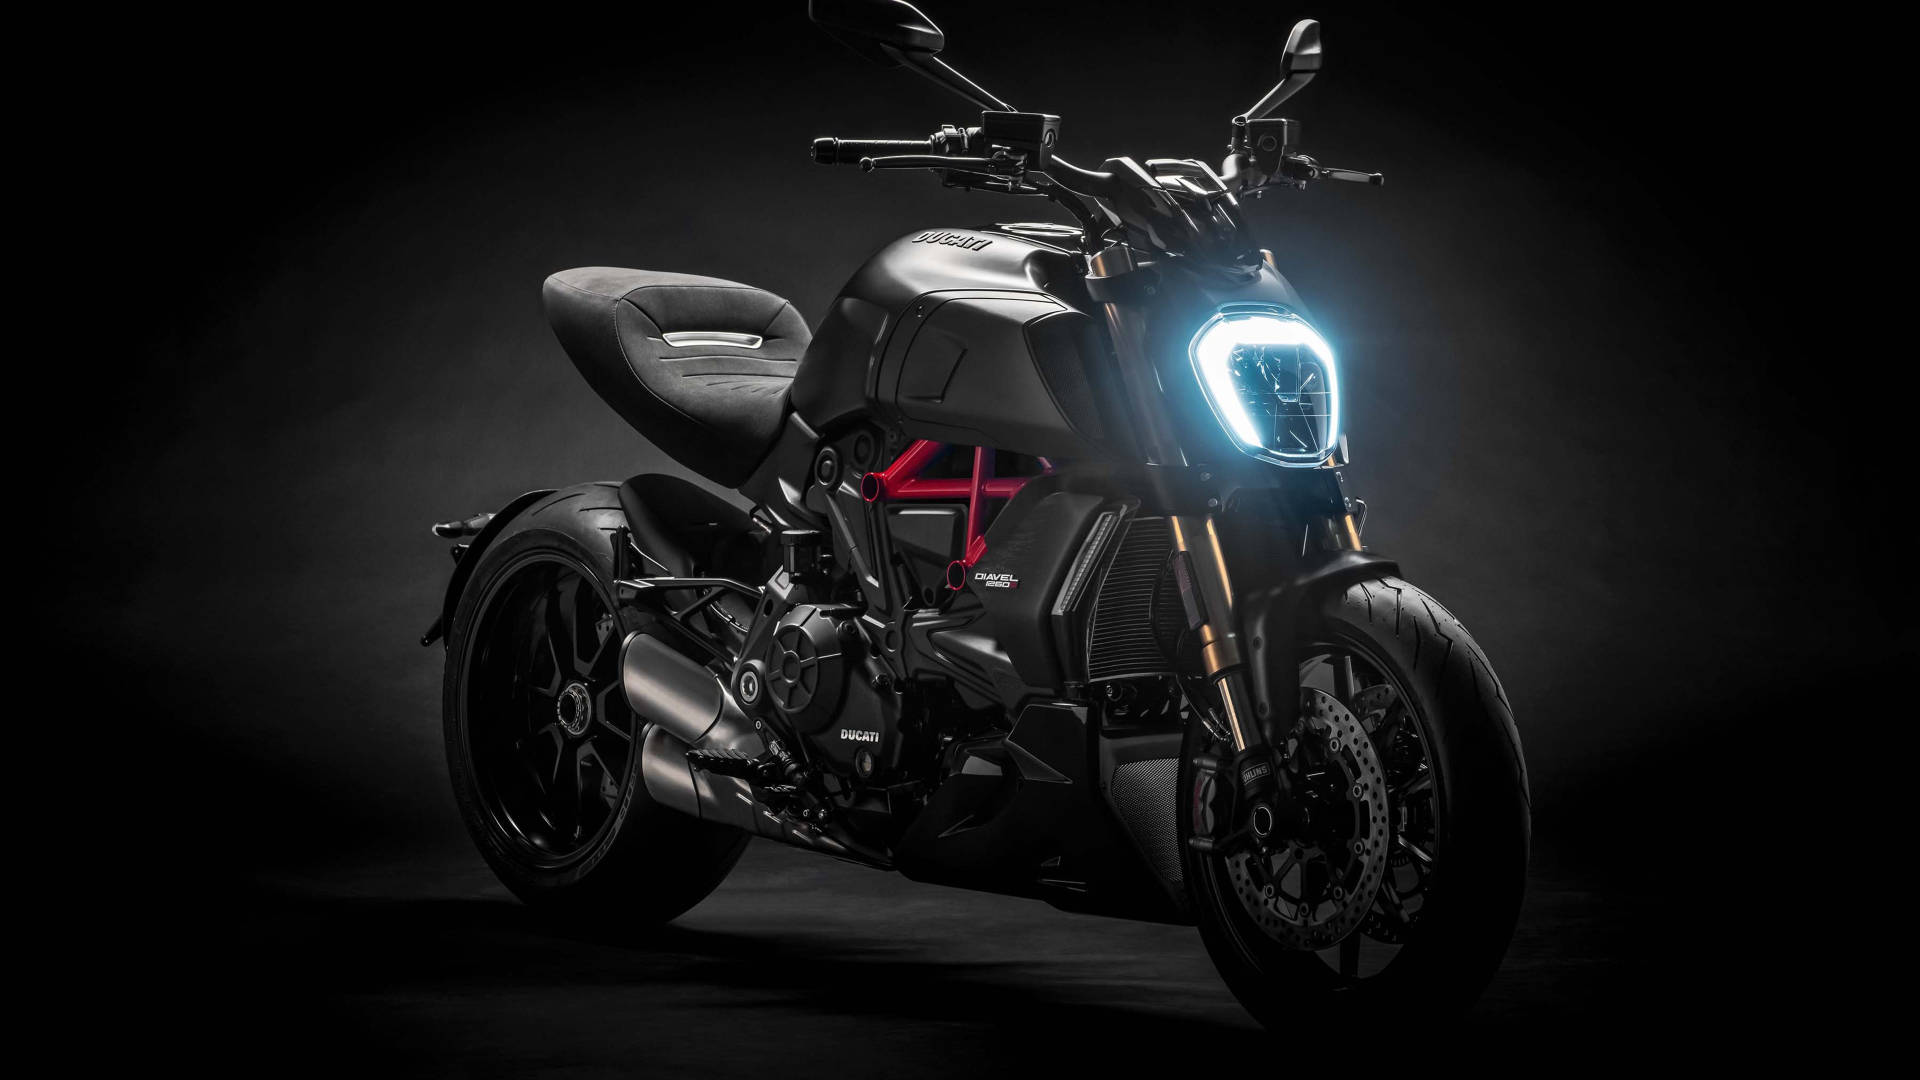 Image Cruise The Streets With A Ducati Diavel 1260 S Background